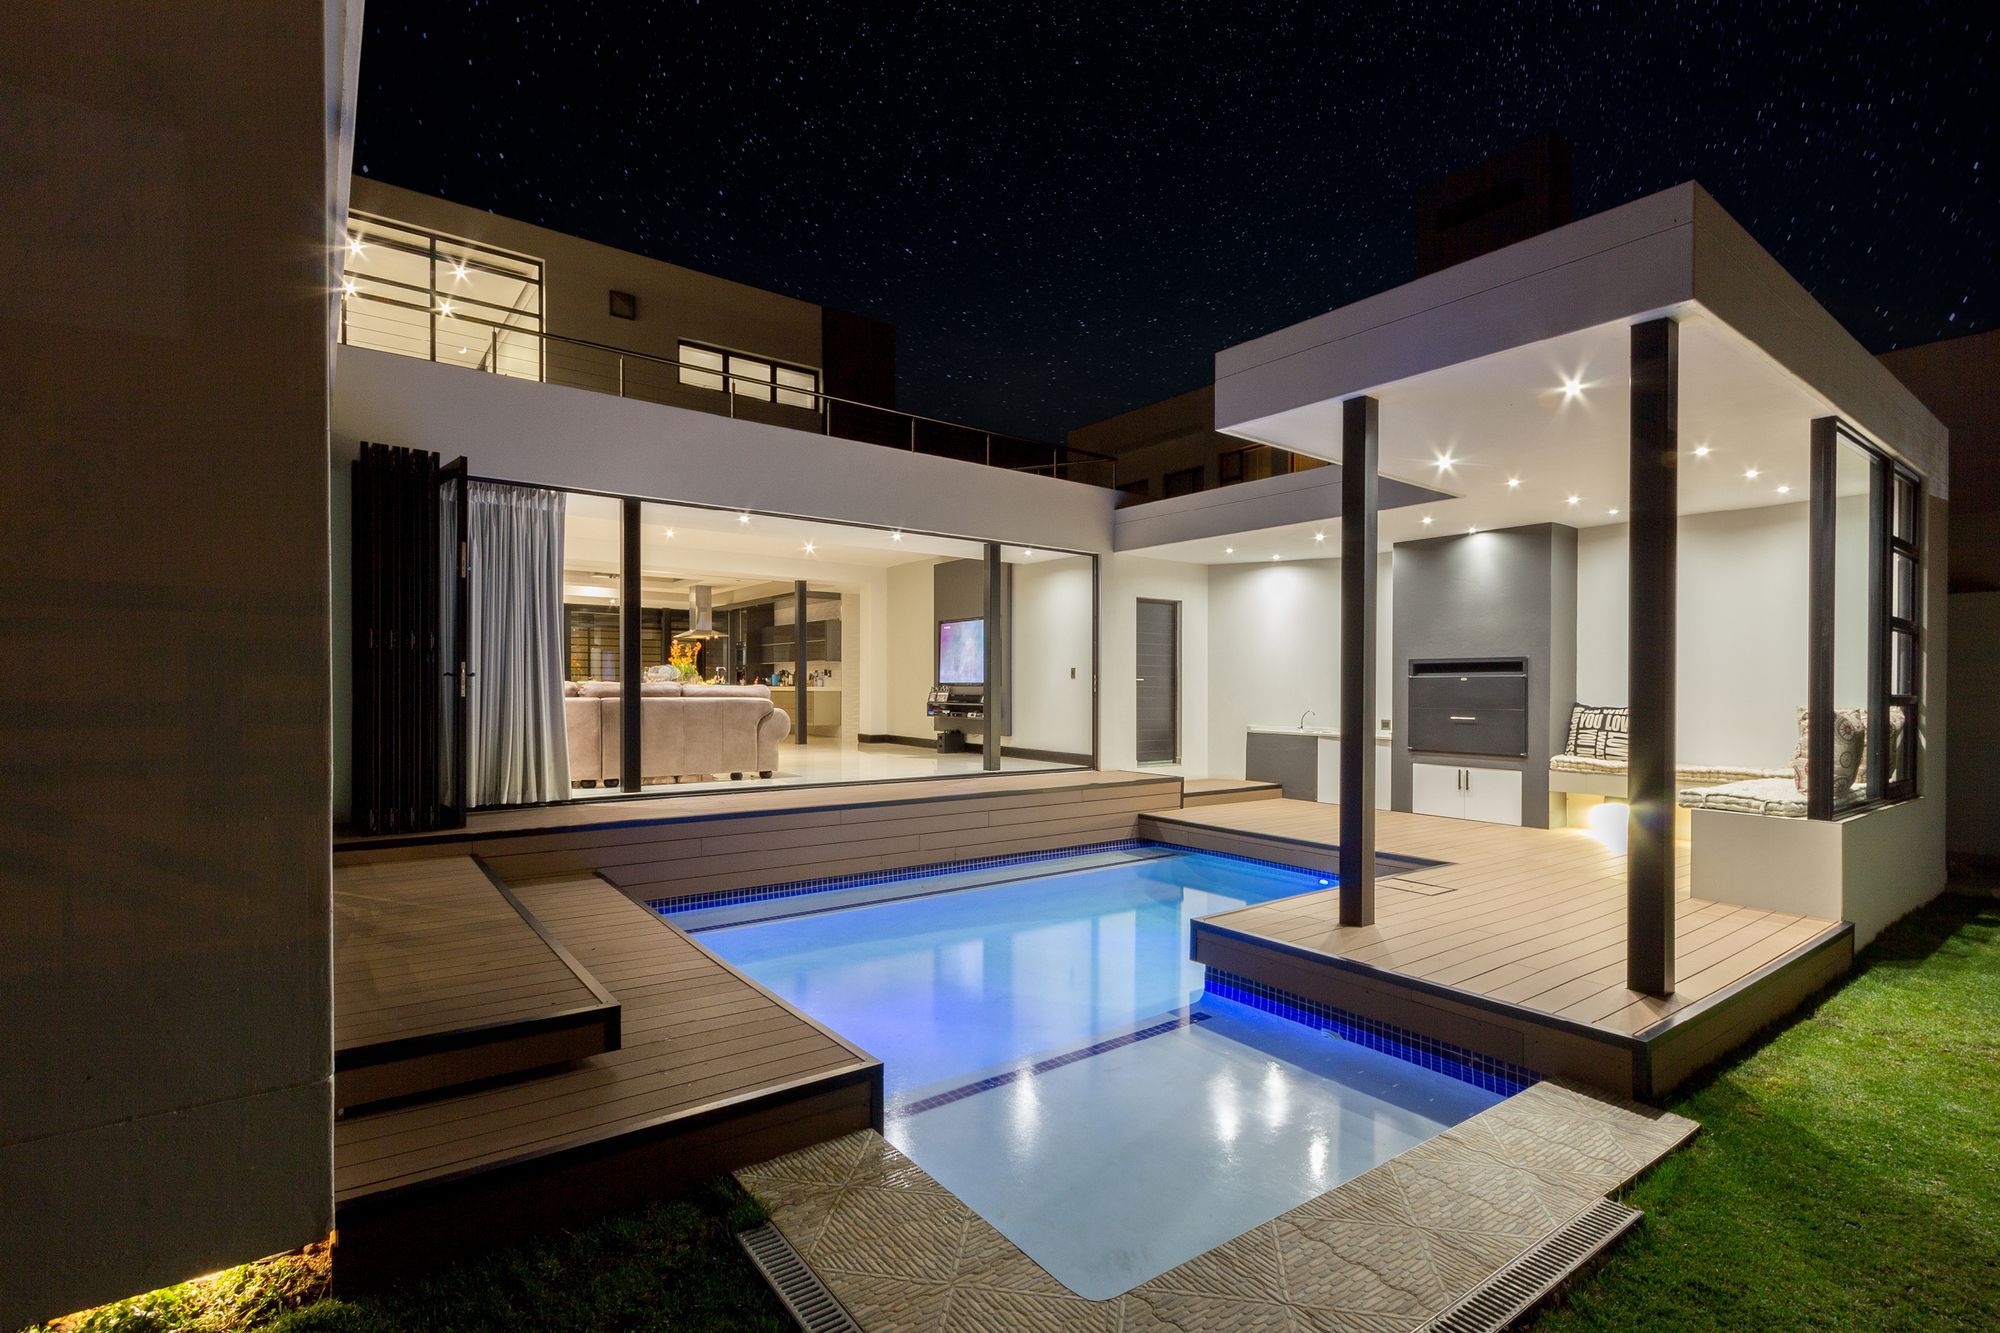 Spread across three different levels, a central courtyard that flows into the rear garden and sparkling recessed lighting put the final touches on a South African home where outdoor living takes precedence.